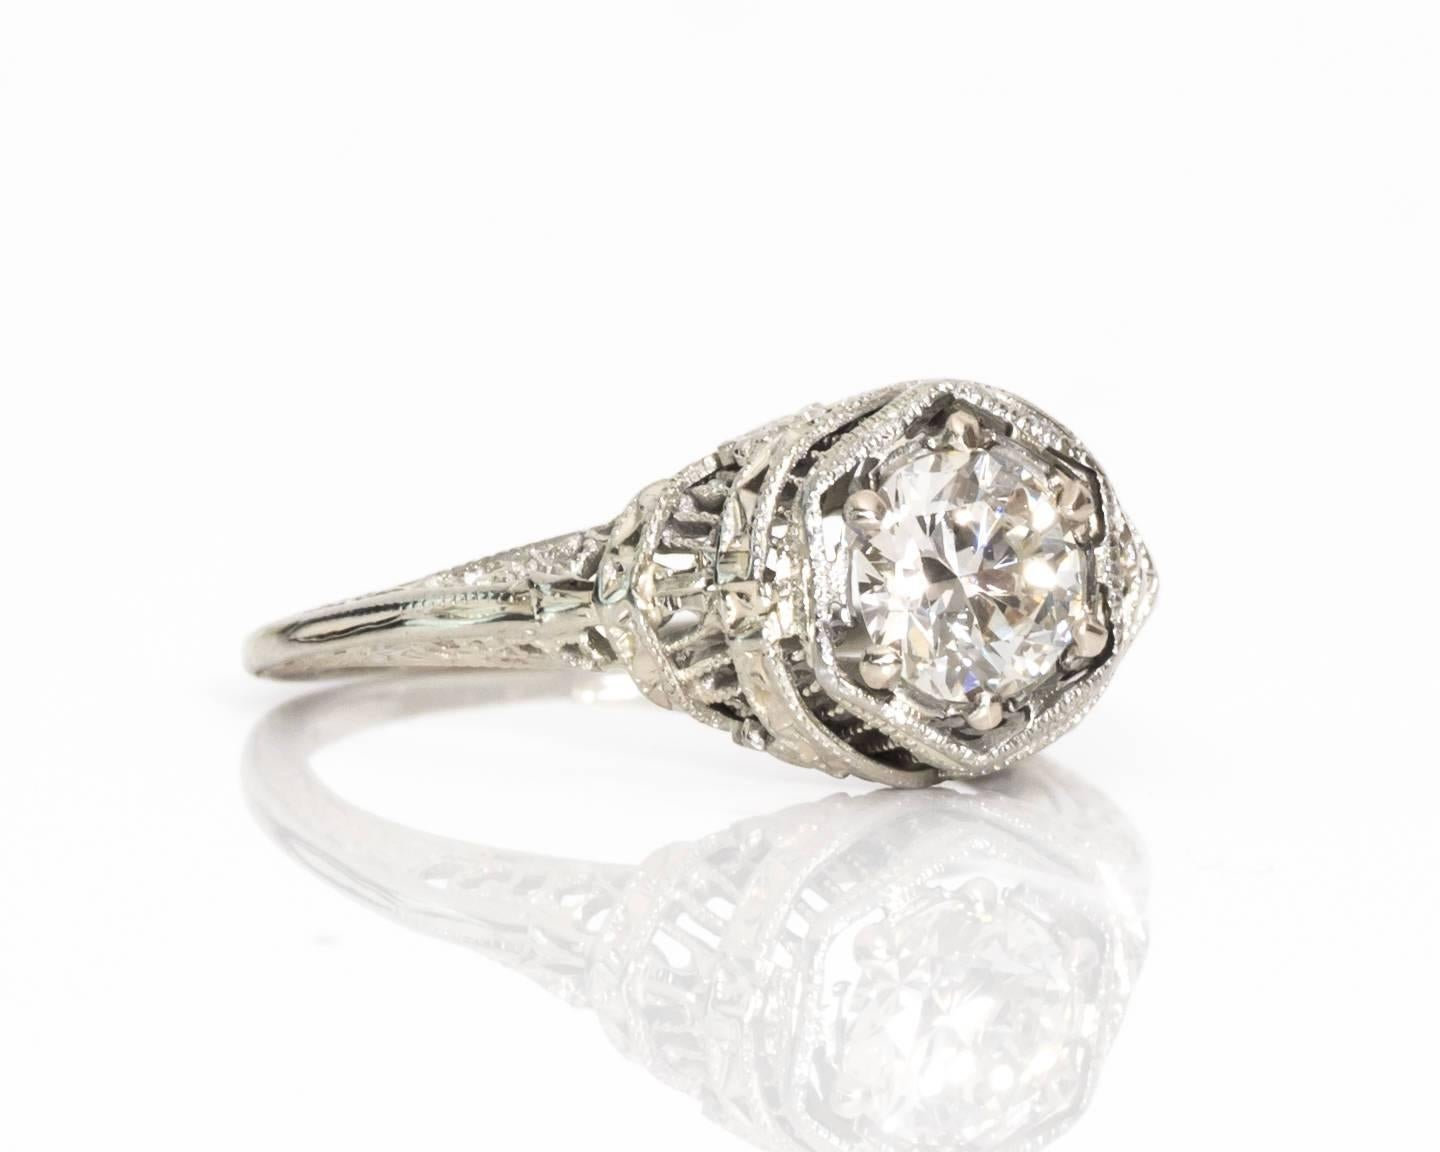 A ring almost as fanciful as the wedding cake! The intricate side profile of this piece includes draping and filigree etchings to the finest degree of craftsmanship. The solitaire ring has a GIA certified diamond set in a six-prong frame with